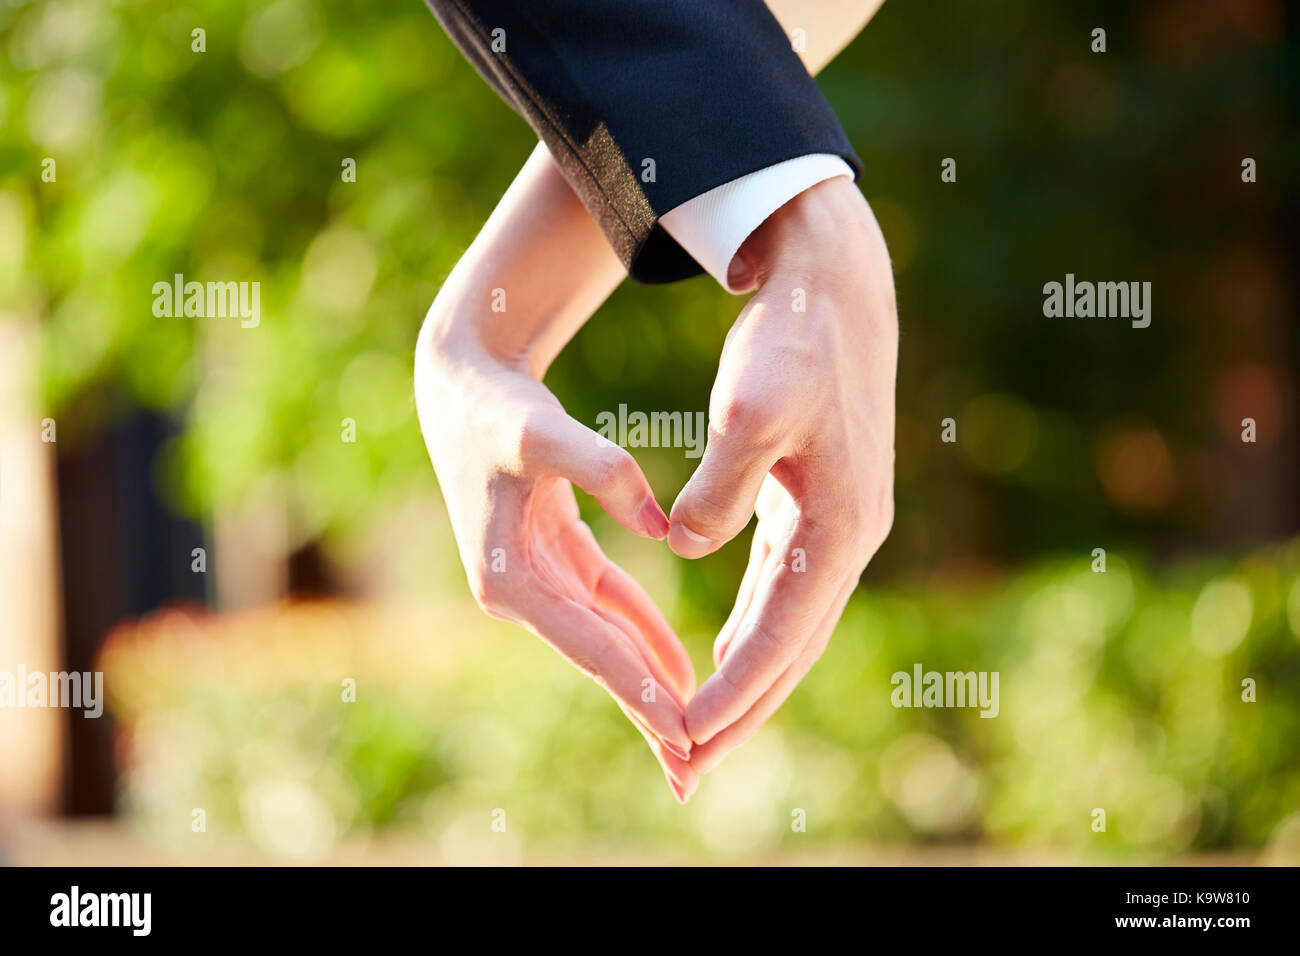 close-up shot of hands of a loving couple forming a heart shape. Stock Photo